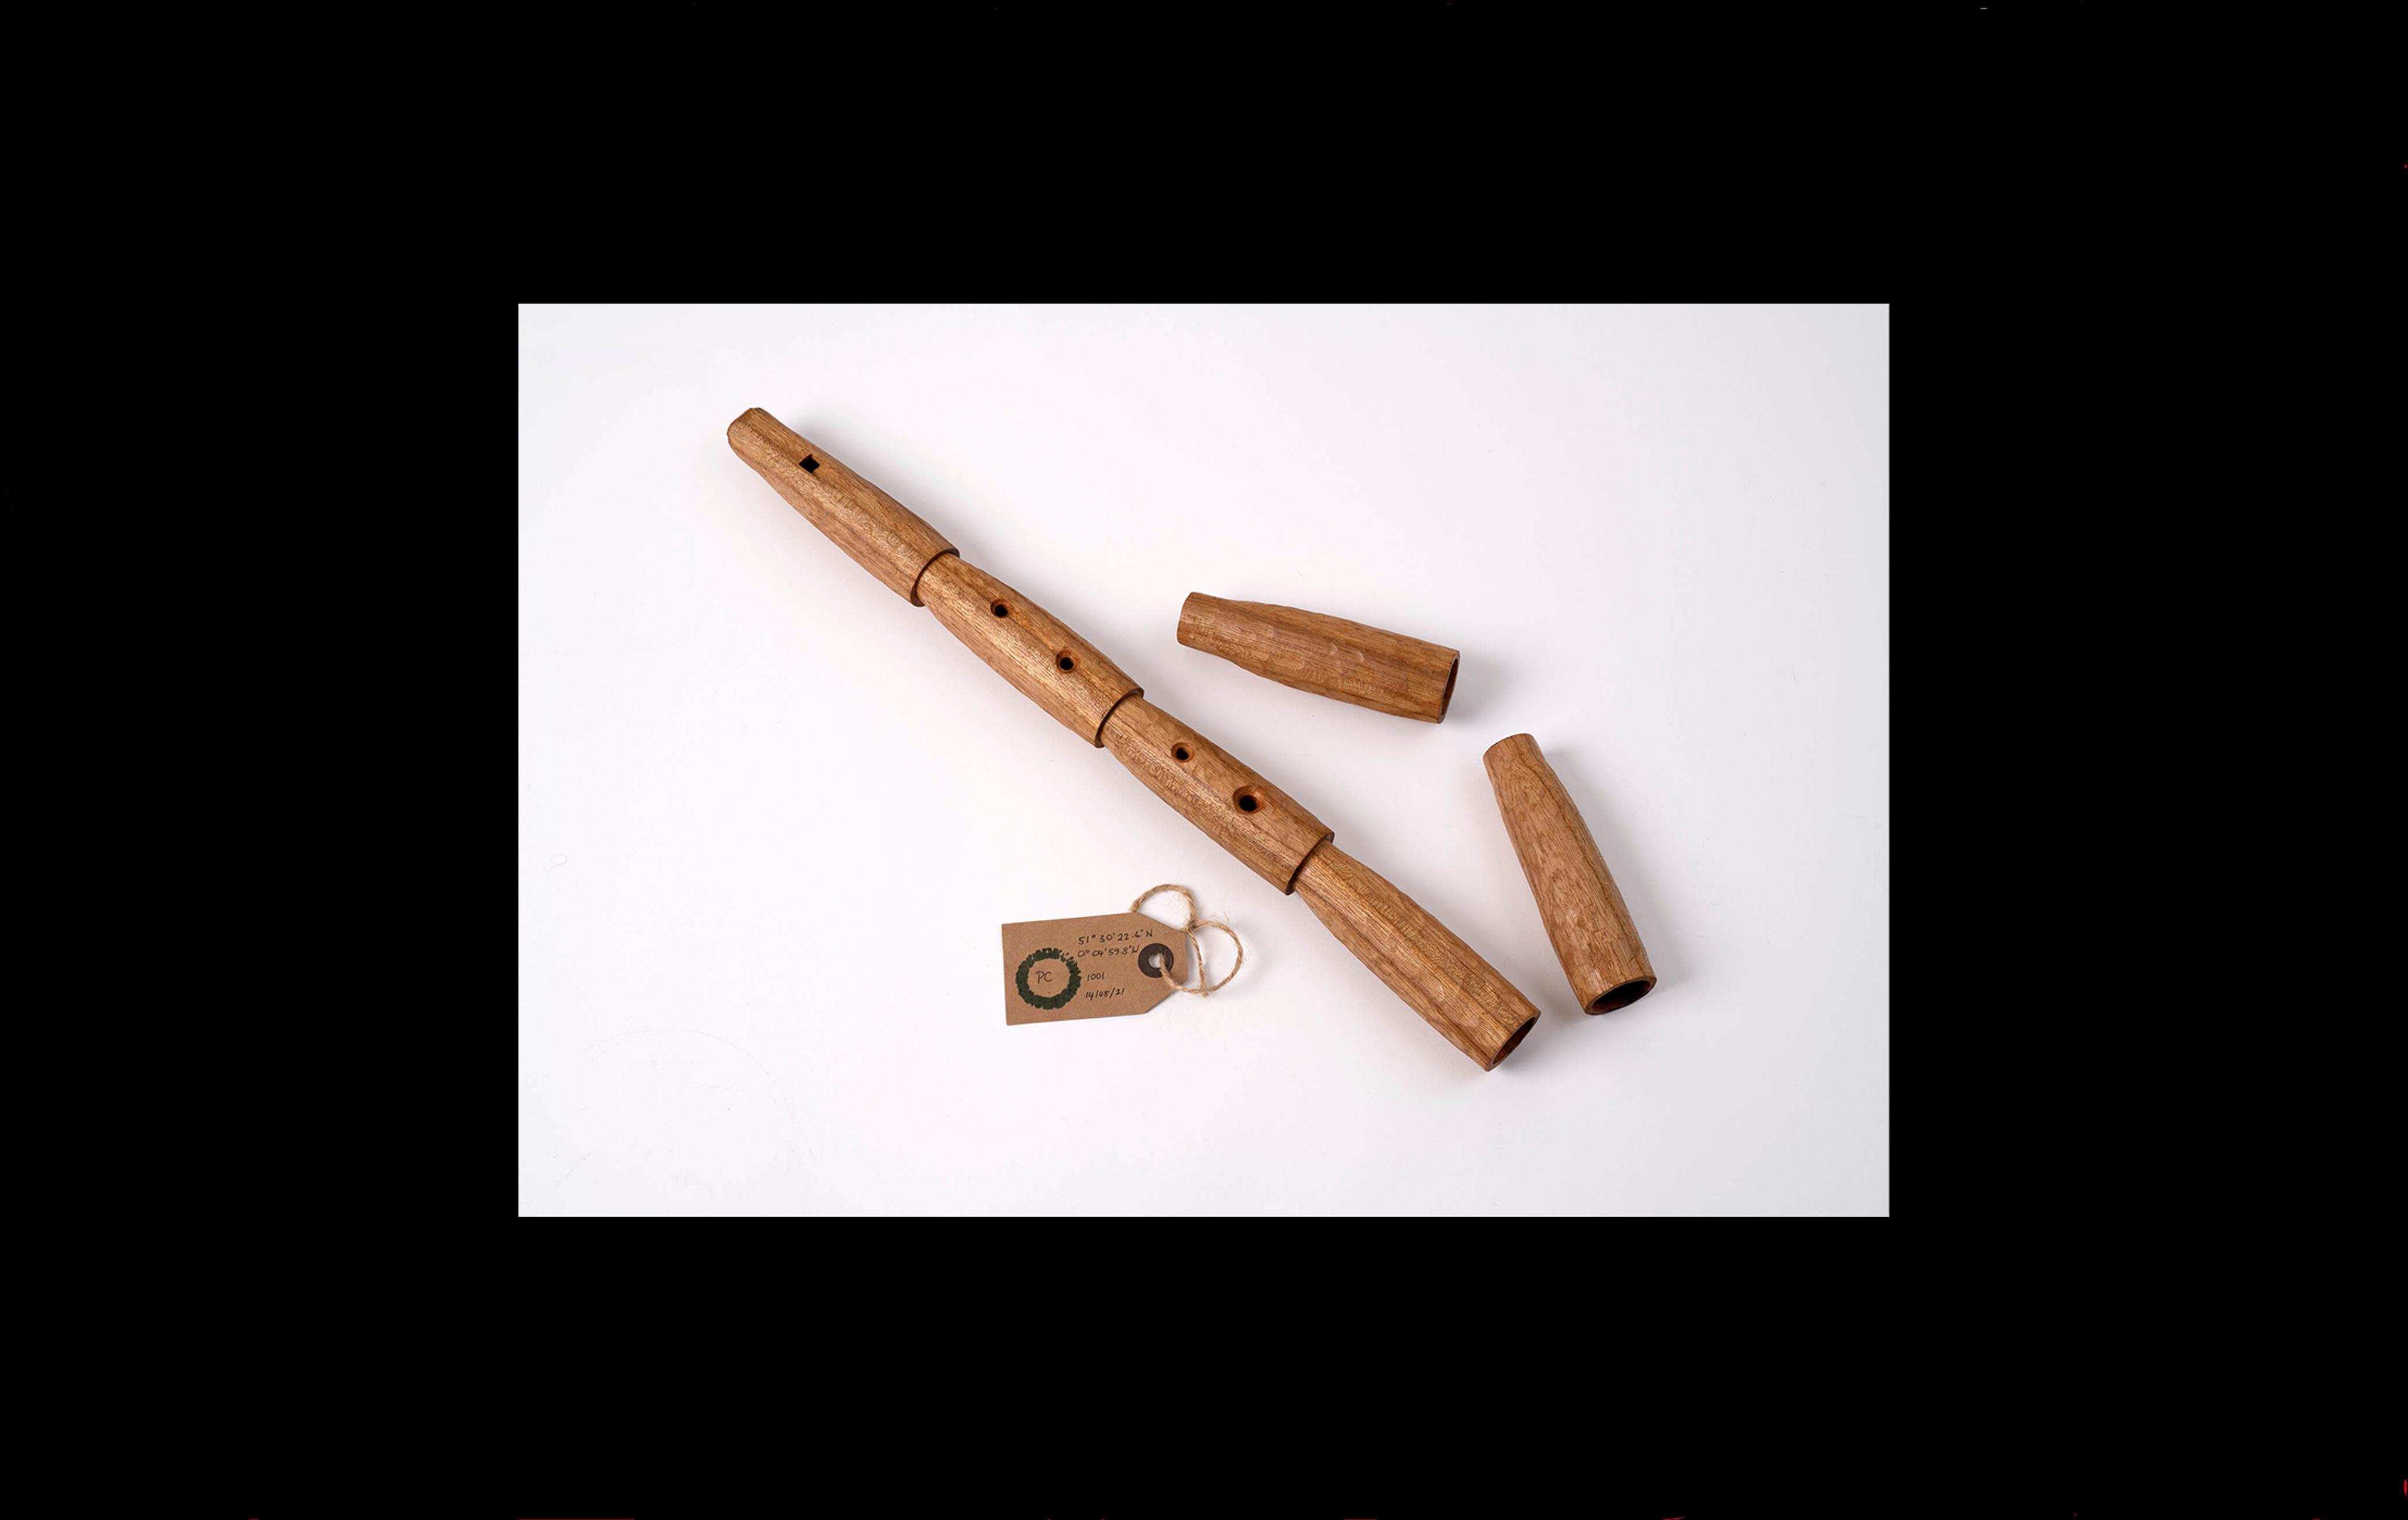 Photograph of a wooden musical pipe with finger holes, made of six sections with two sections separateds 